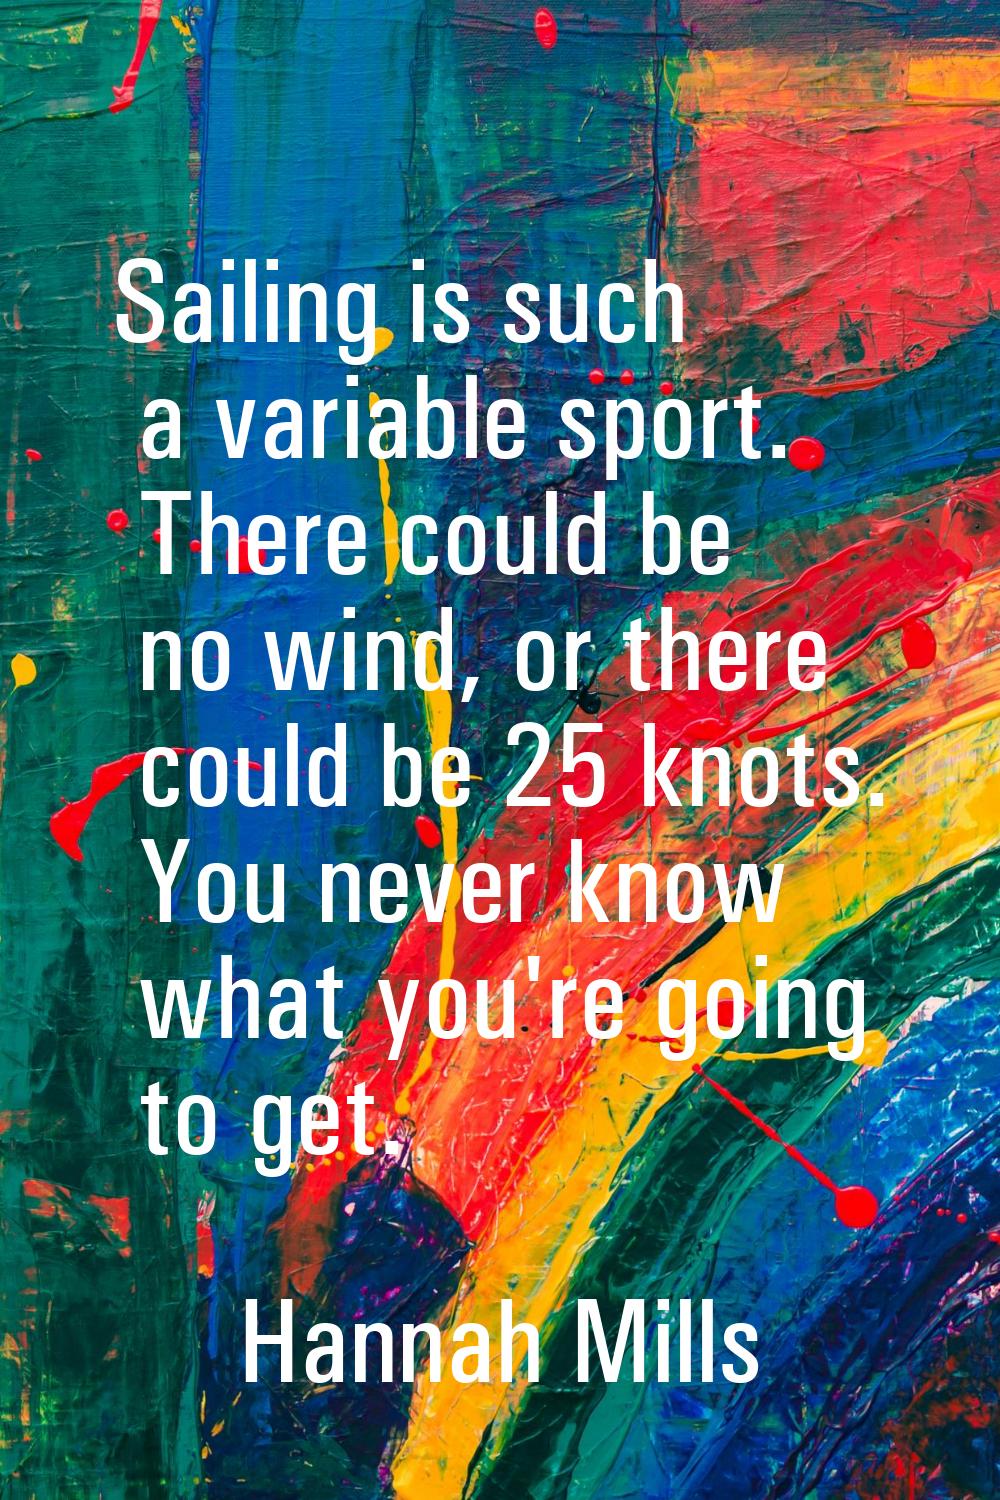 Sailing is such a variable sport. There could be no wind, or there could be 25 knots. You never kno